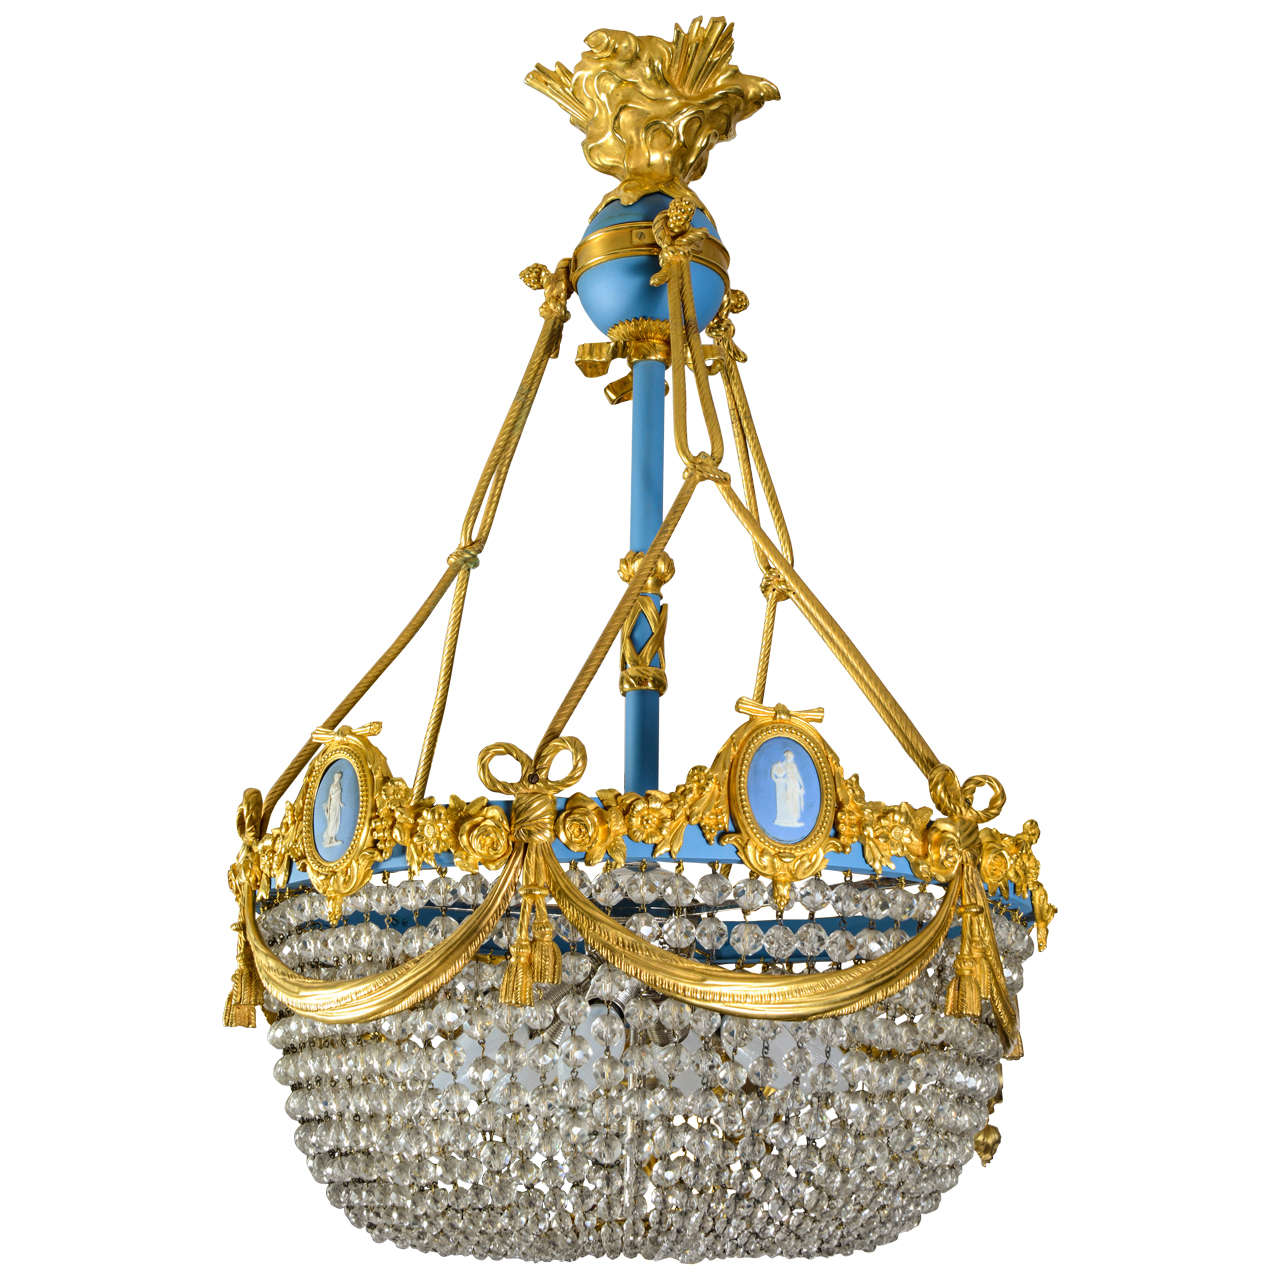 Inusual chandelier decorated with Wedgwood medails For Sale